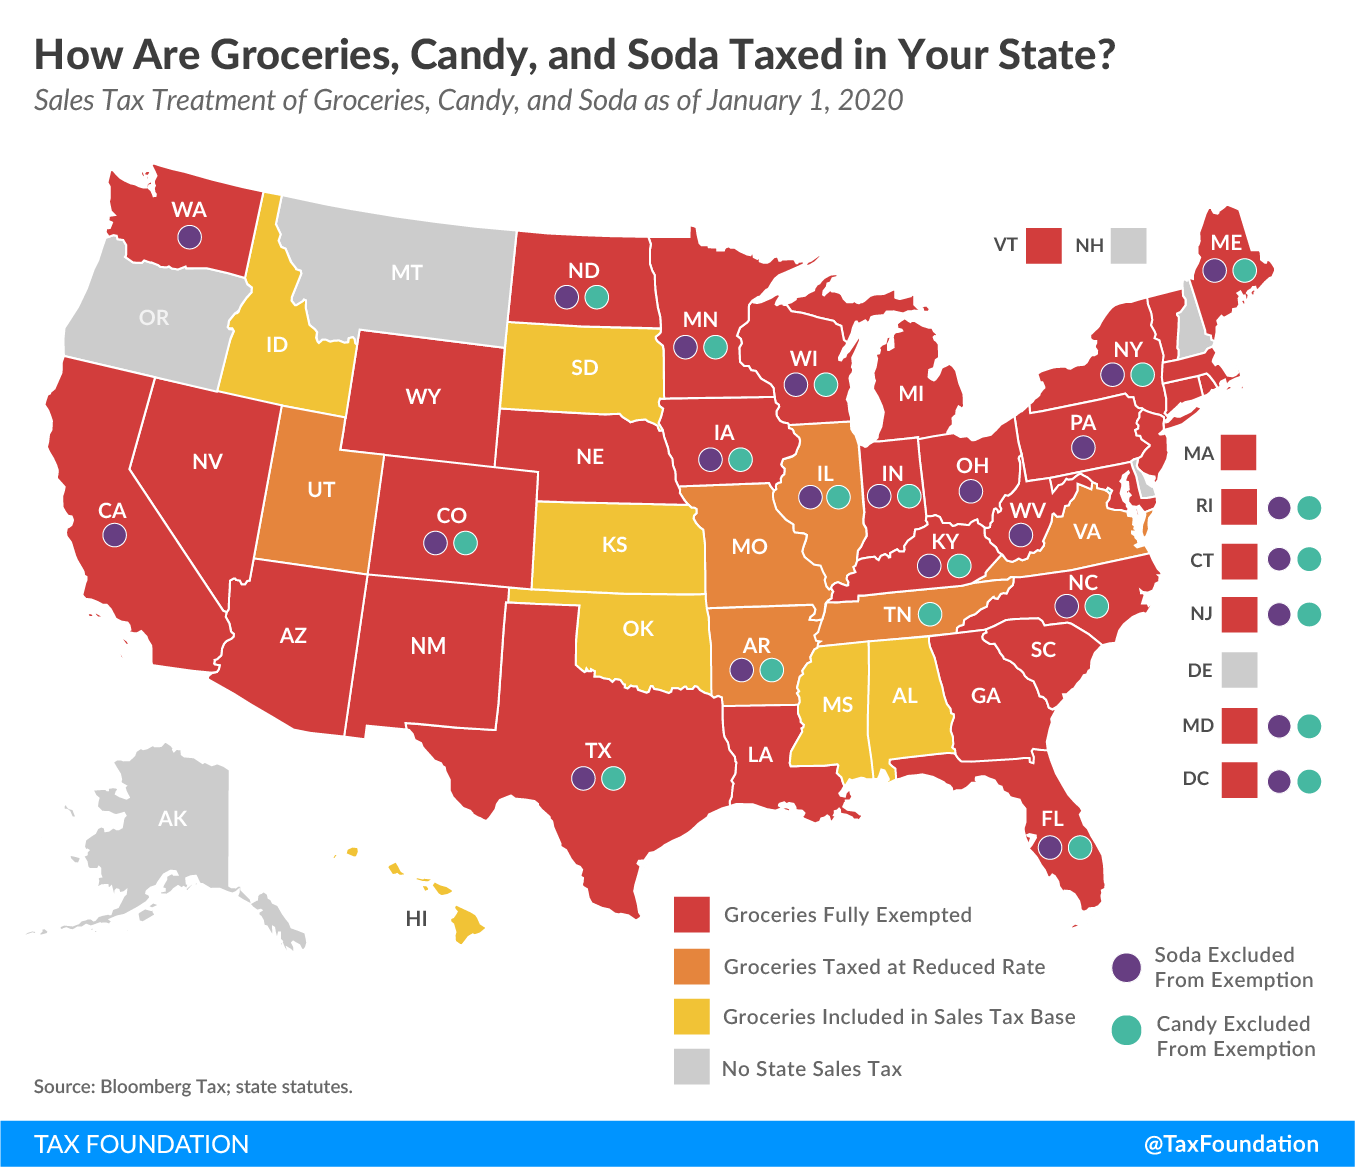 Halloween tax, Halloween candy tax, Sales tax treatment of groceries, candy, and soda as of January 1, 2020